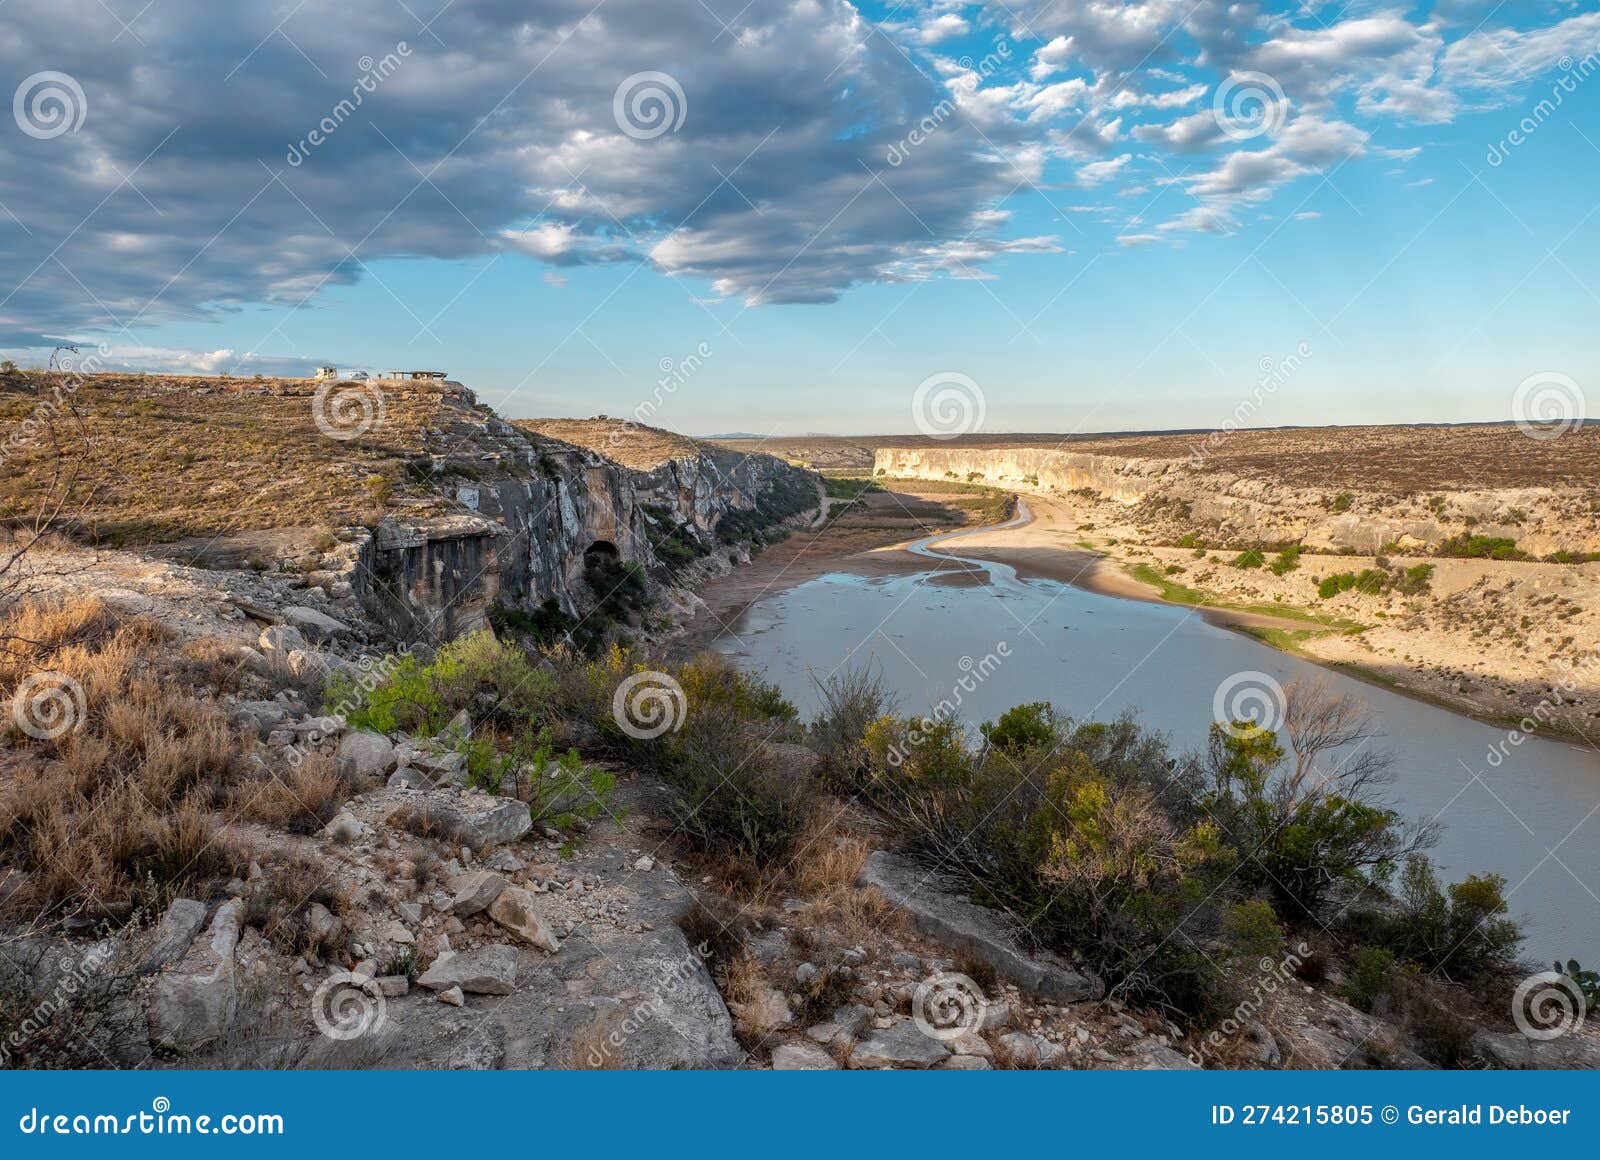 The Pecos River Valley in Texas Stock Image - Image of river